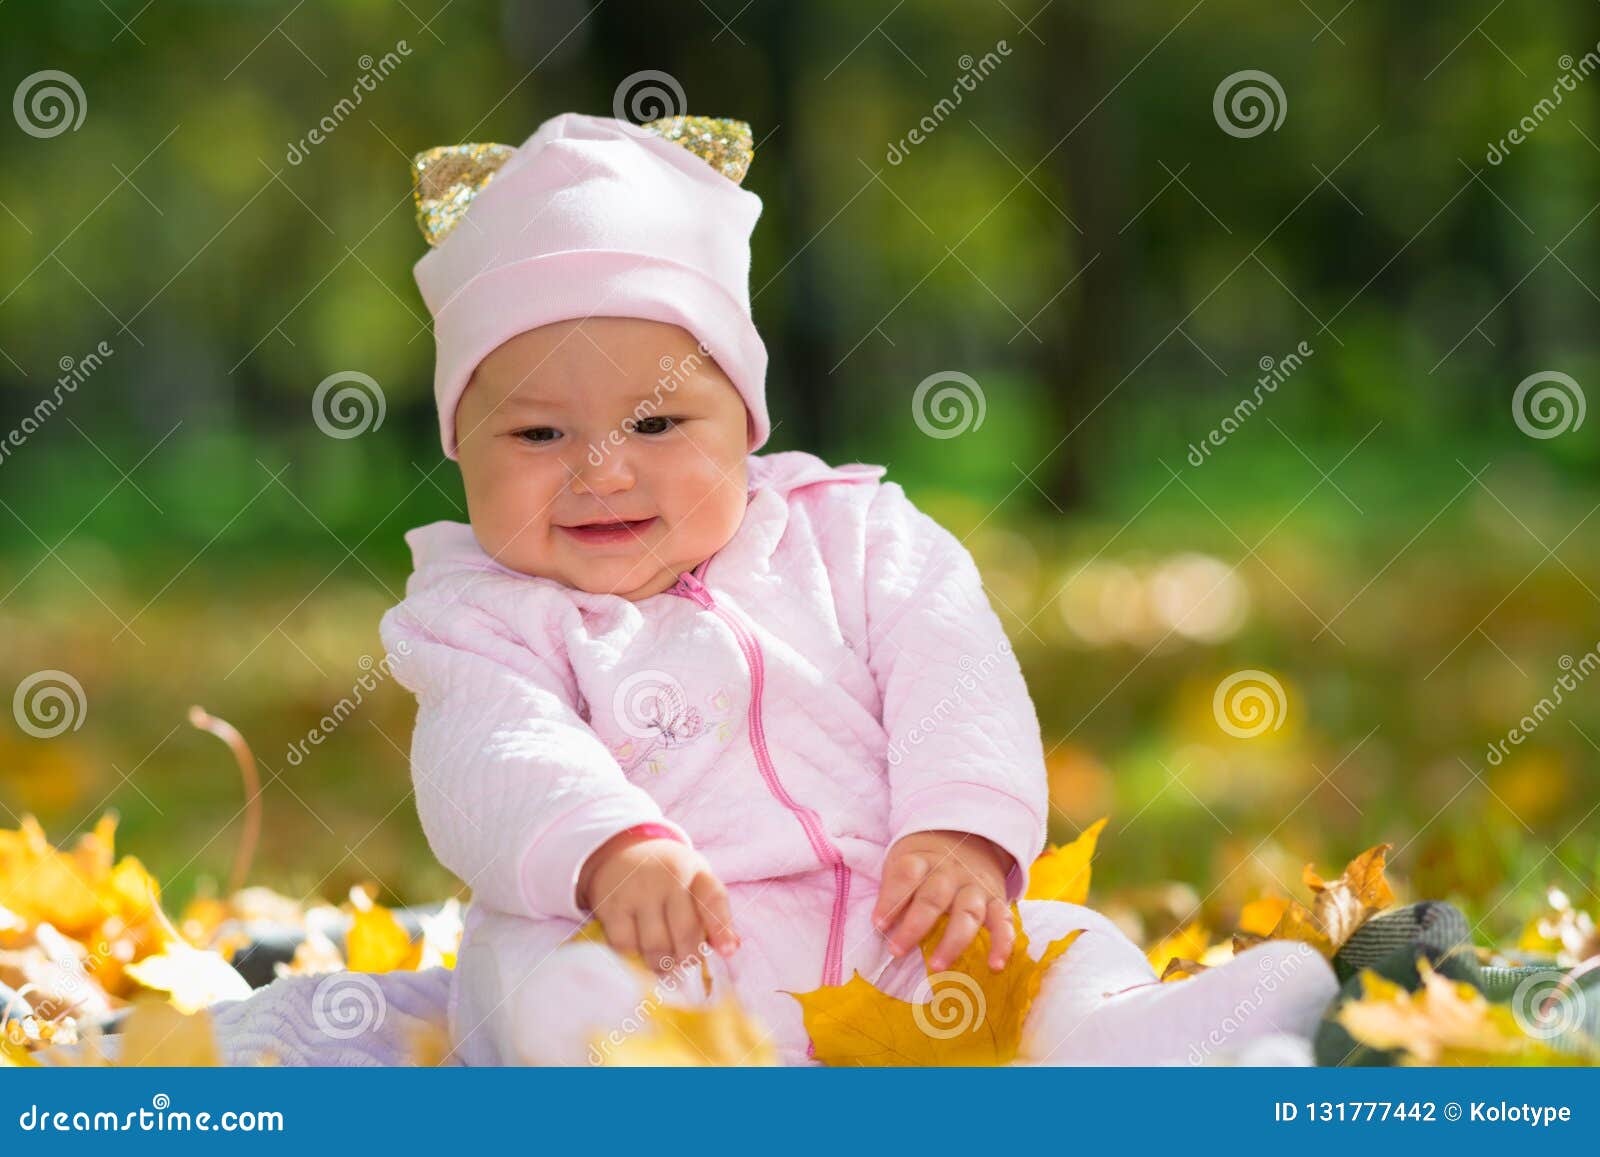 cherubic baby girl playing with yellow leaves.